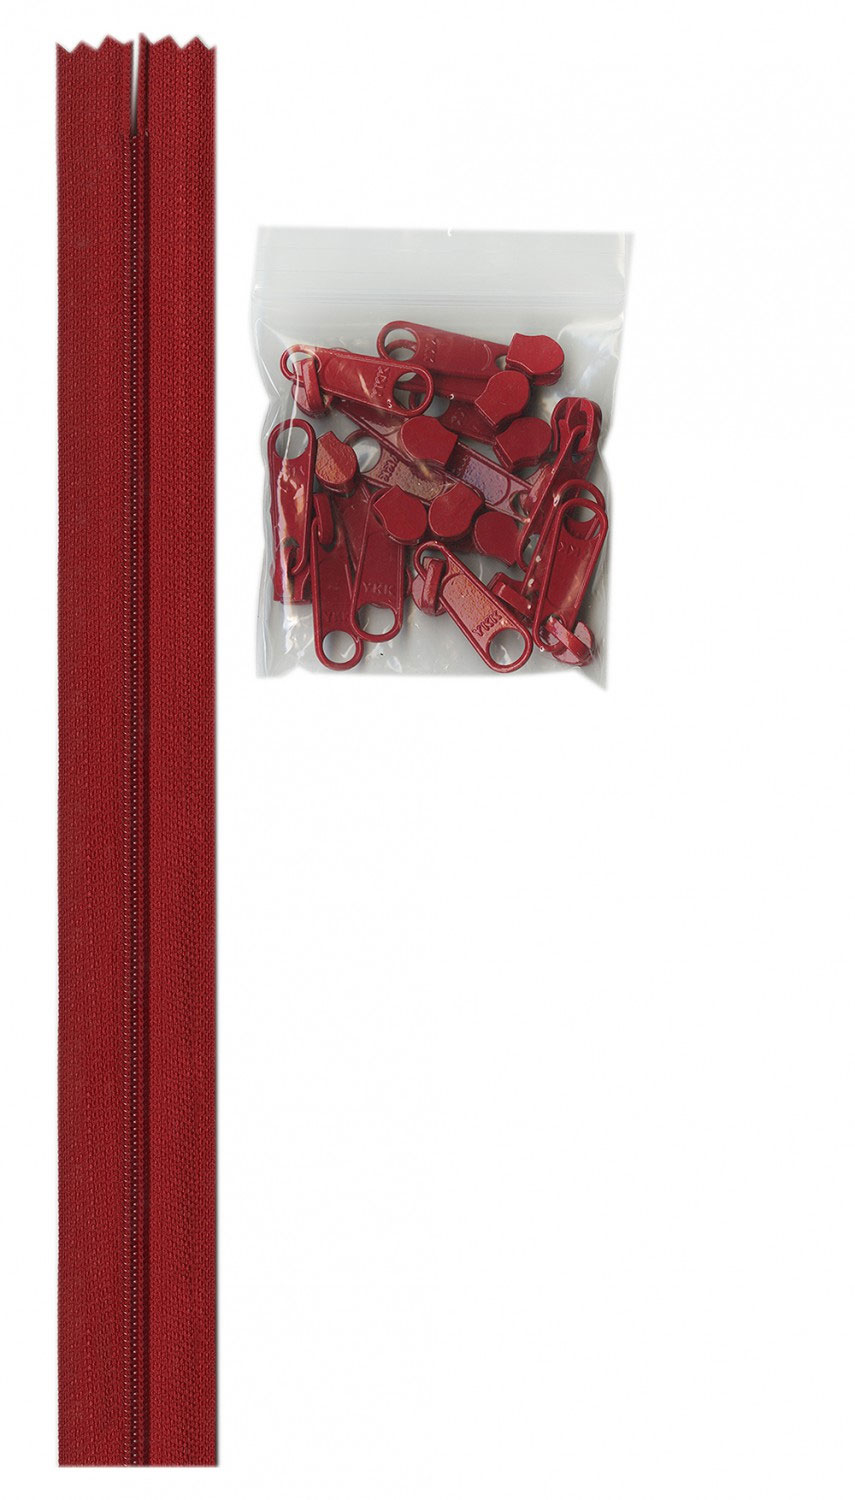 Zippers-and-Pulls-Kit-from-Annie-Unrein-Hot-Red